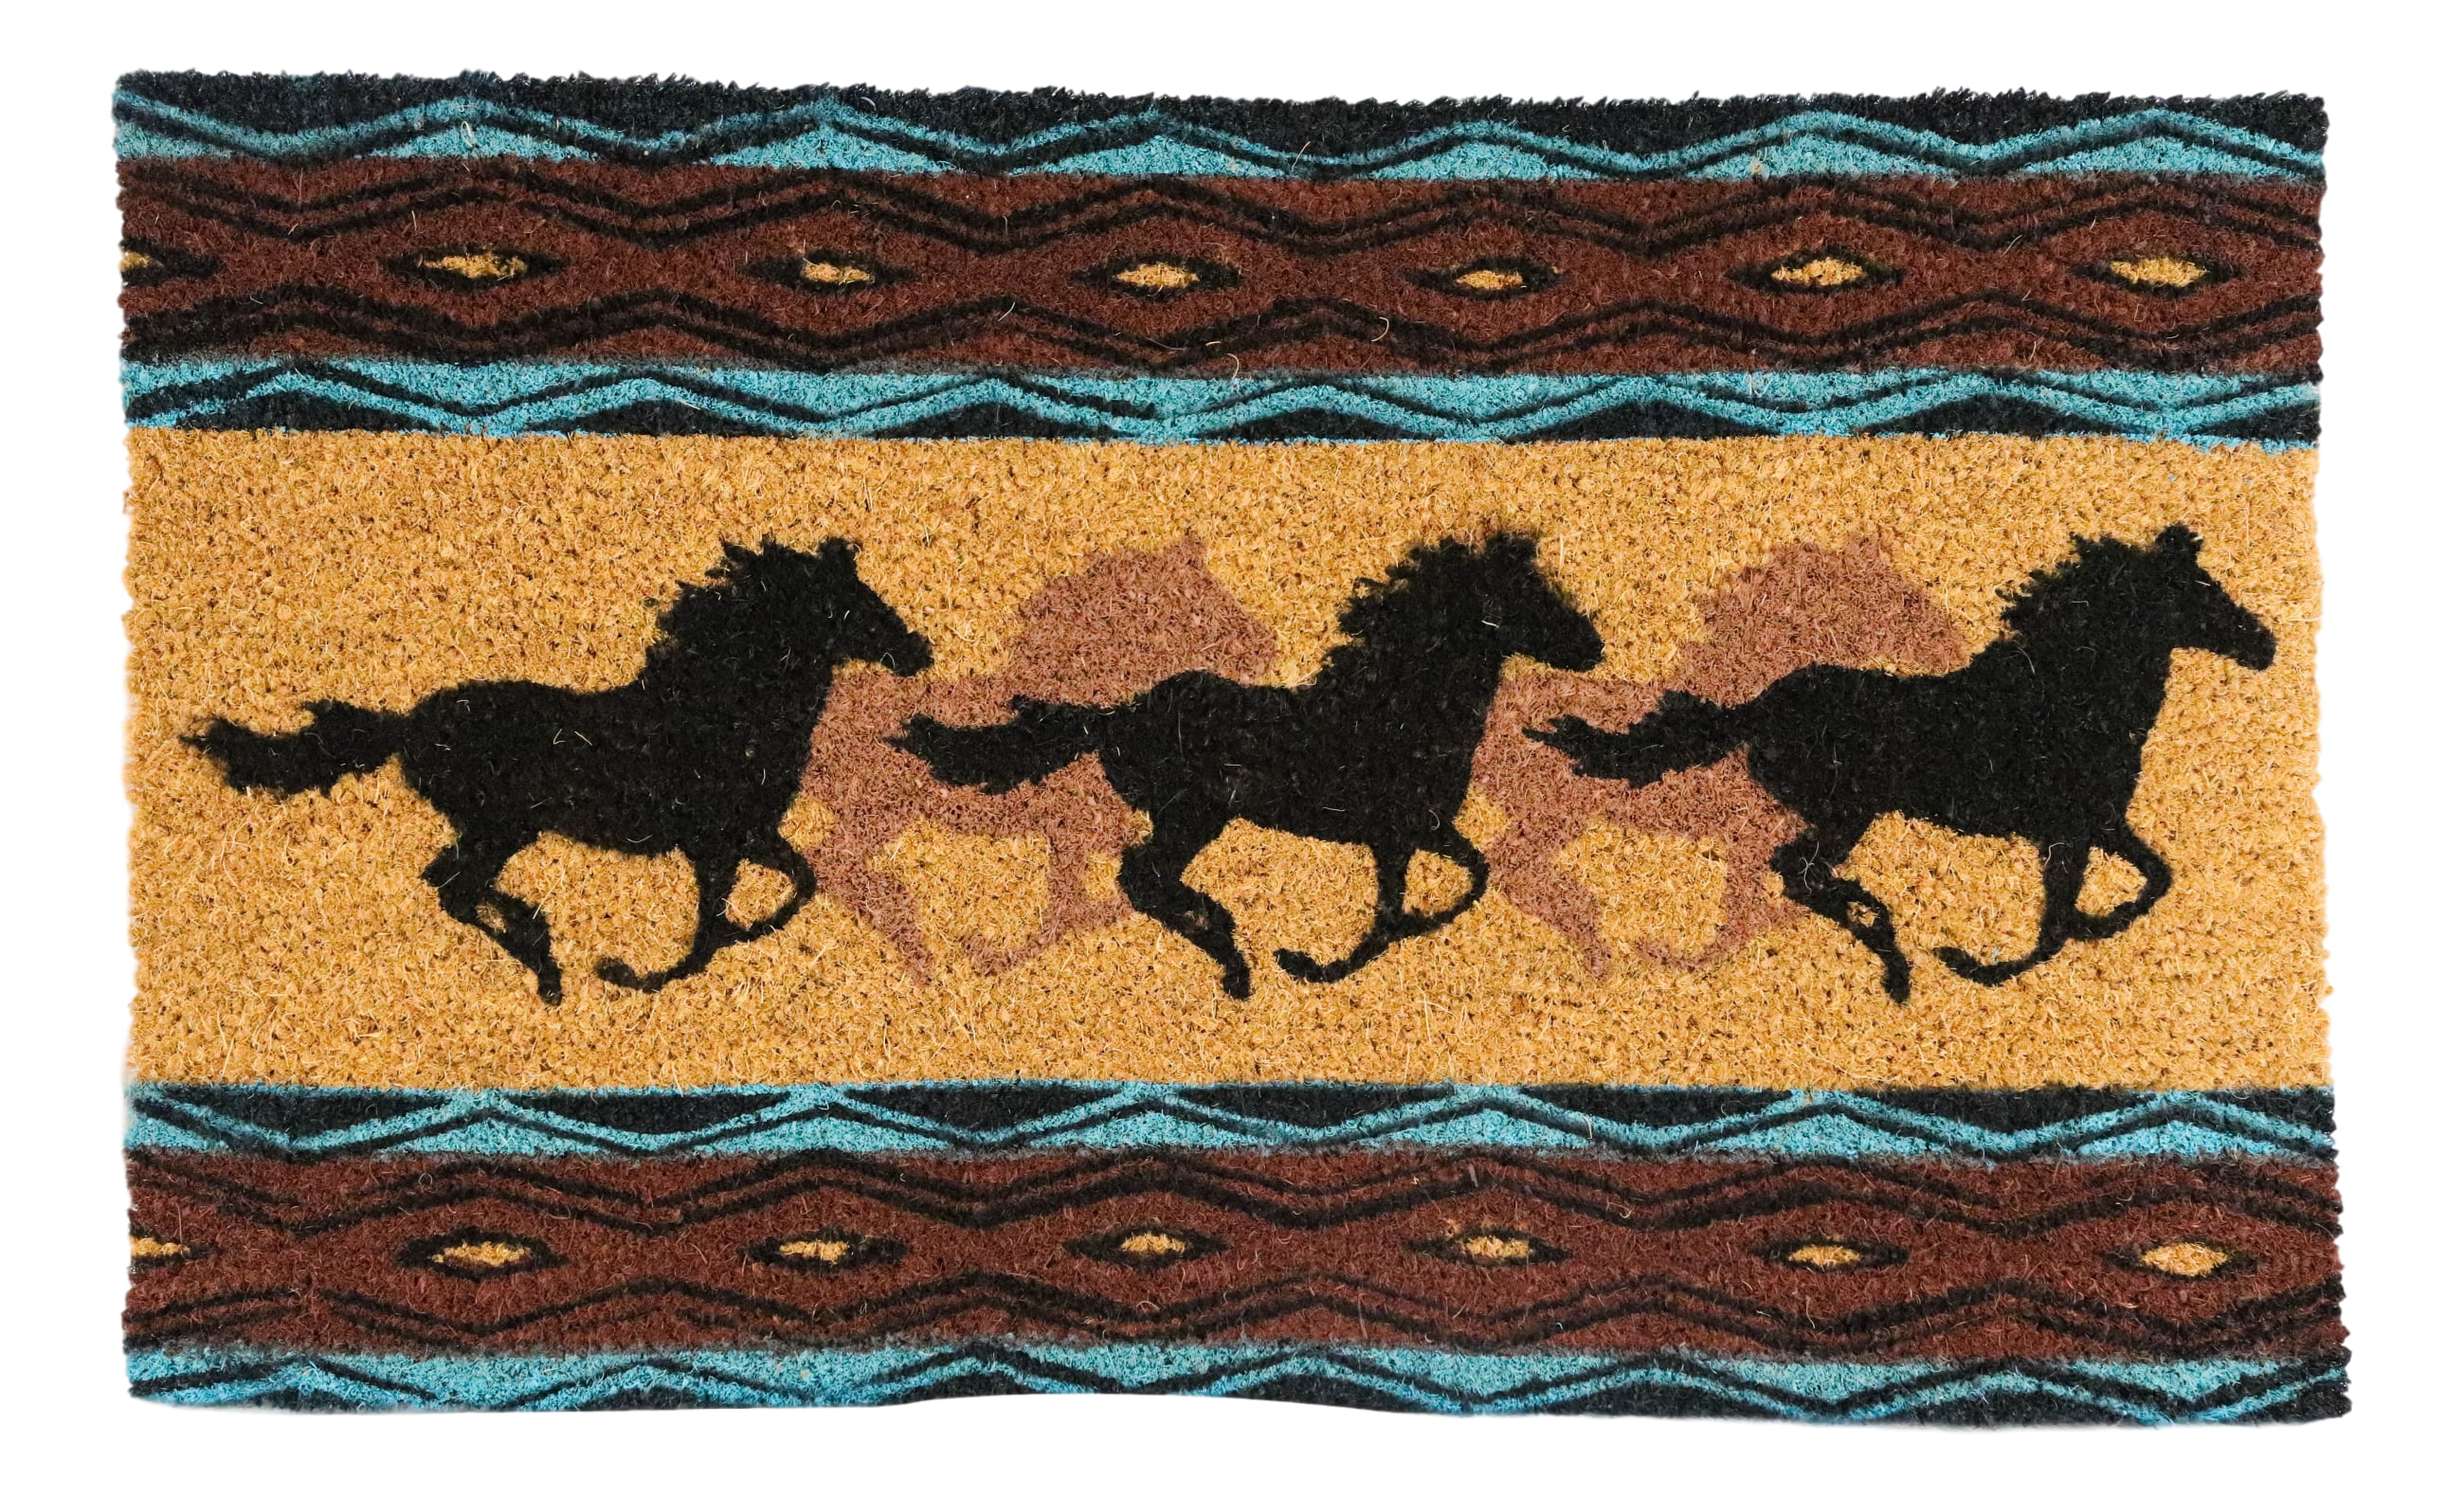 Details about  / 3D Galloping Horse Group O745 Animal Non Slip Rug Mat Elegant Photo Carpet Fay